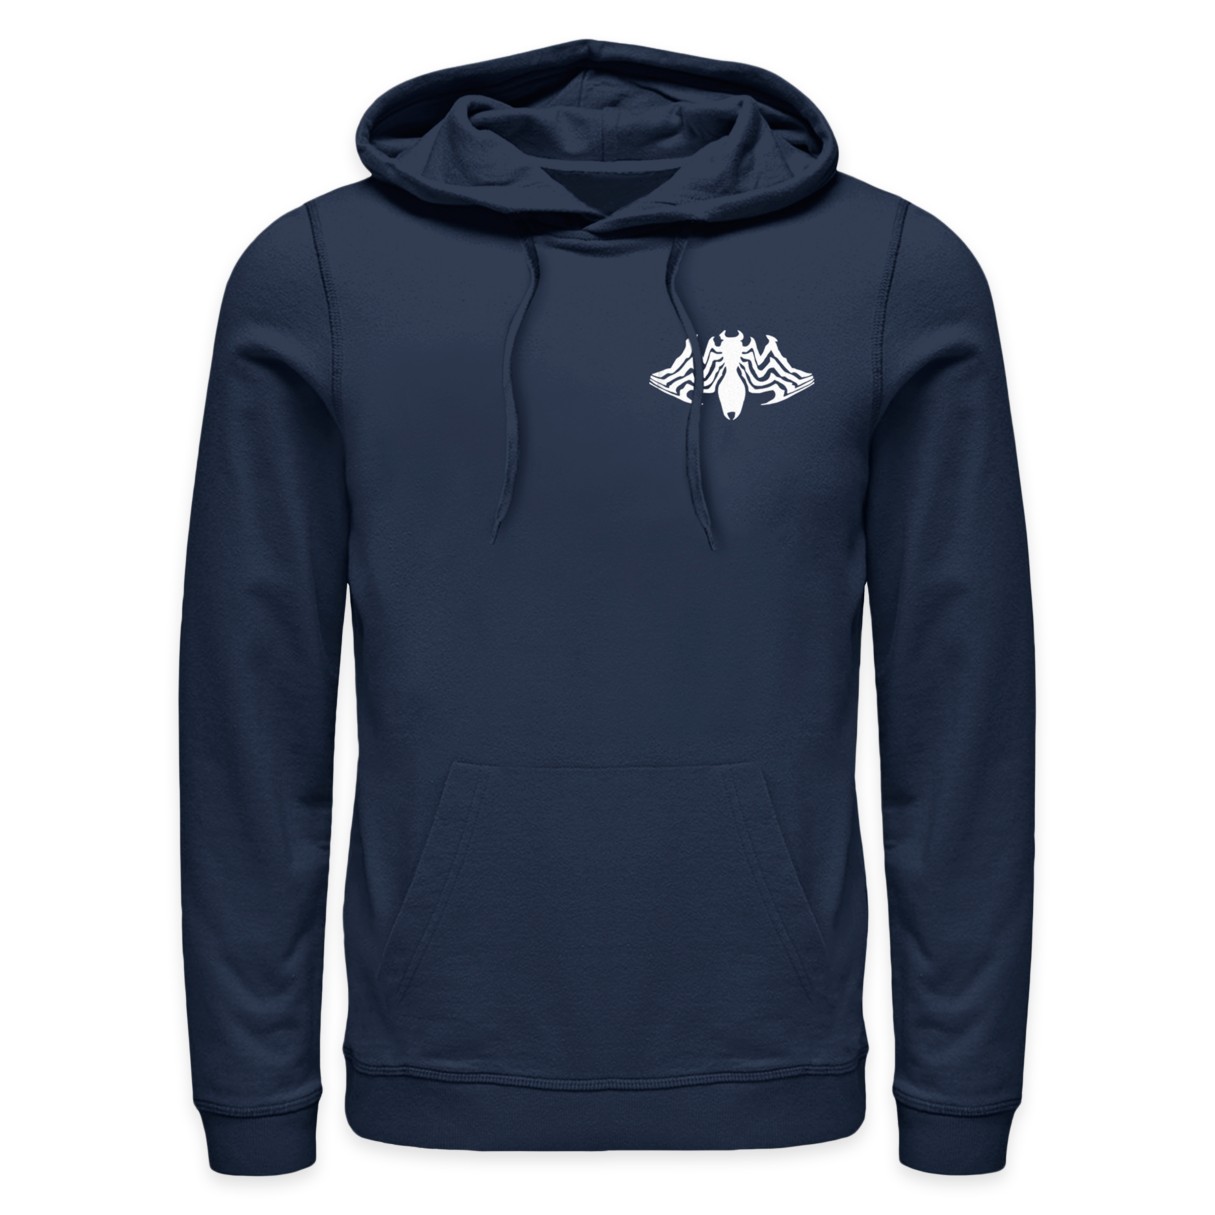 Venom Pullover Hoodie for Adults